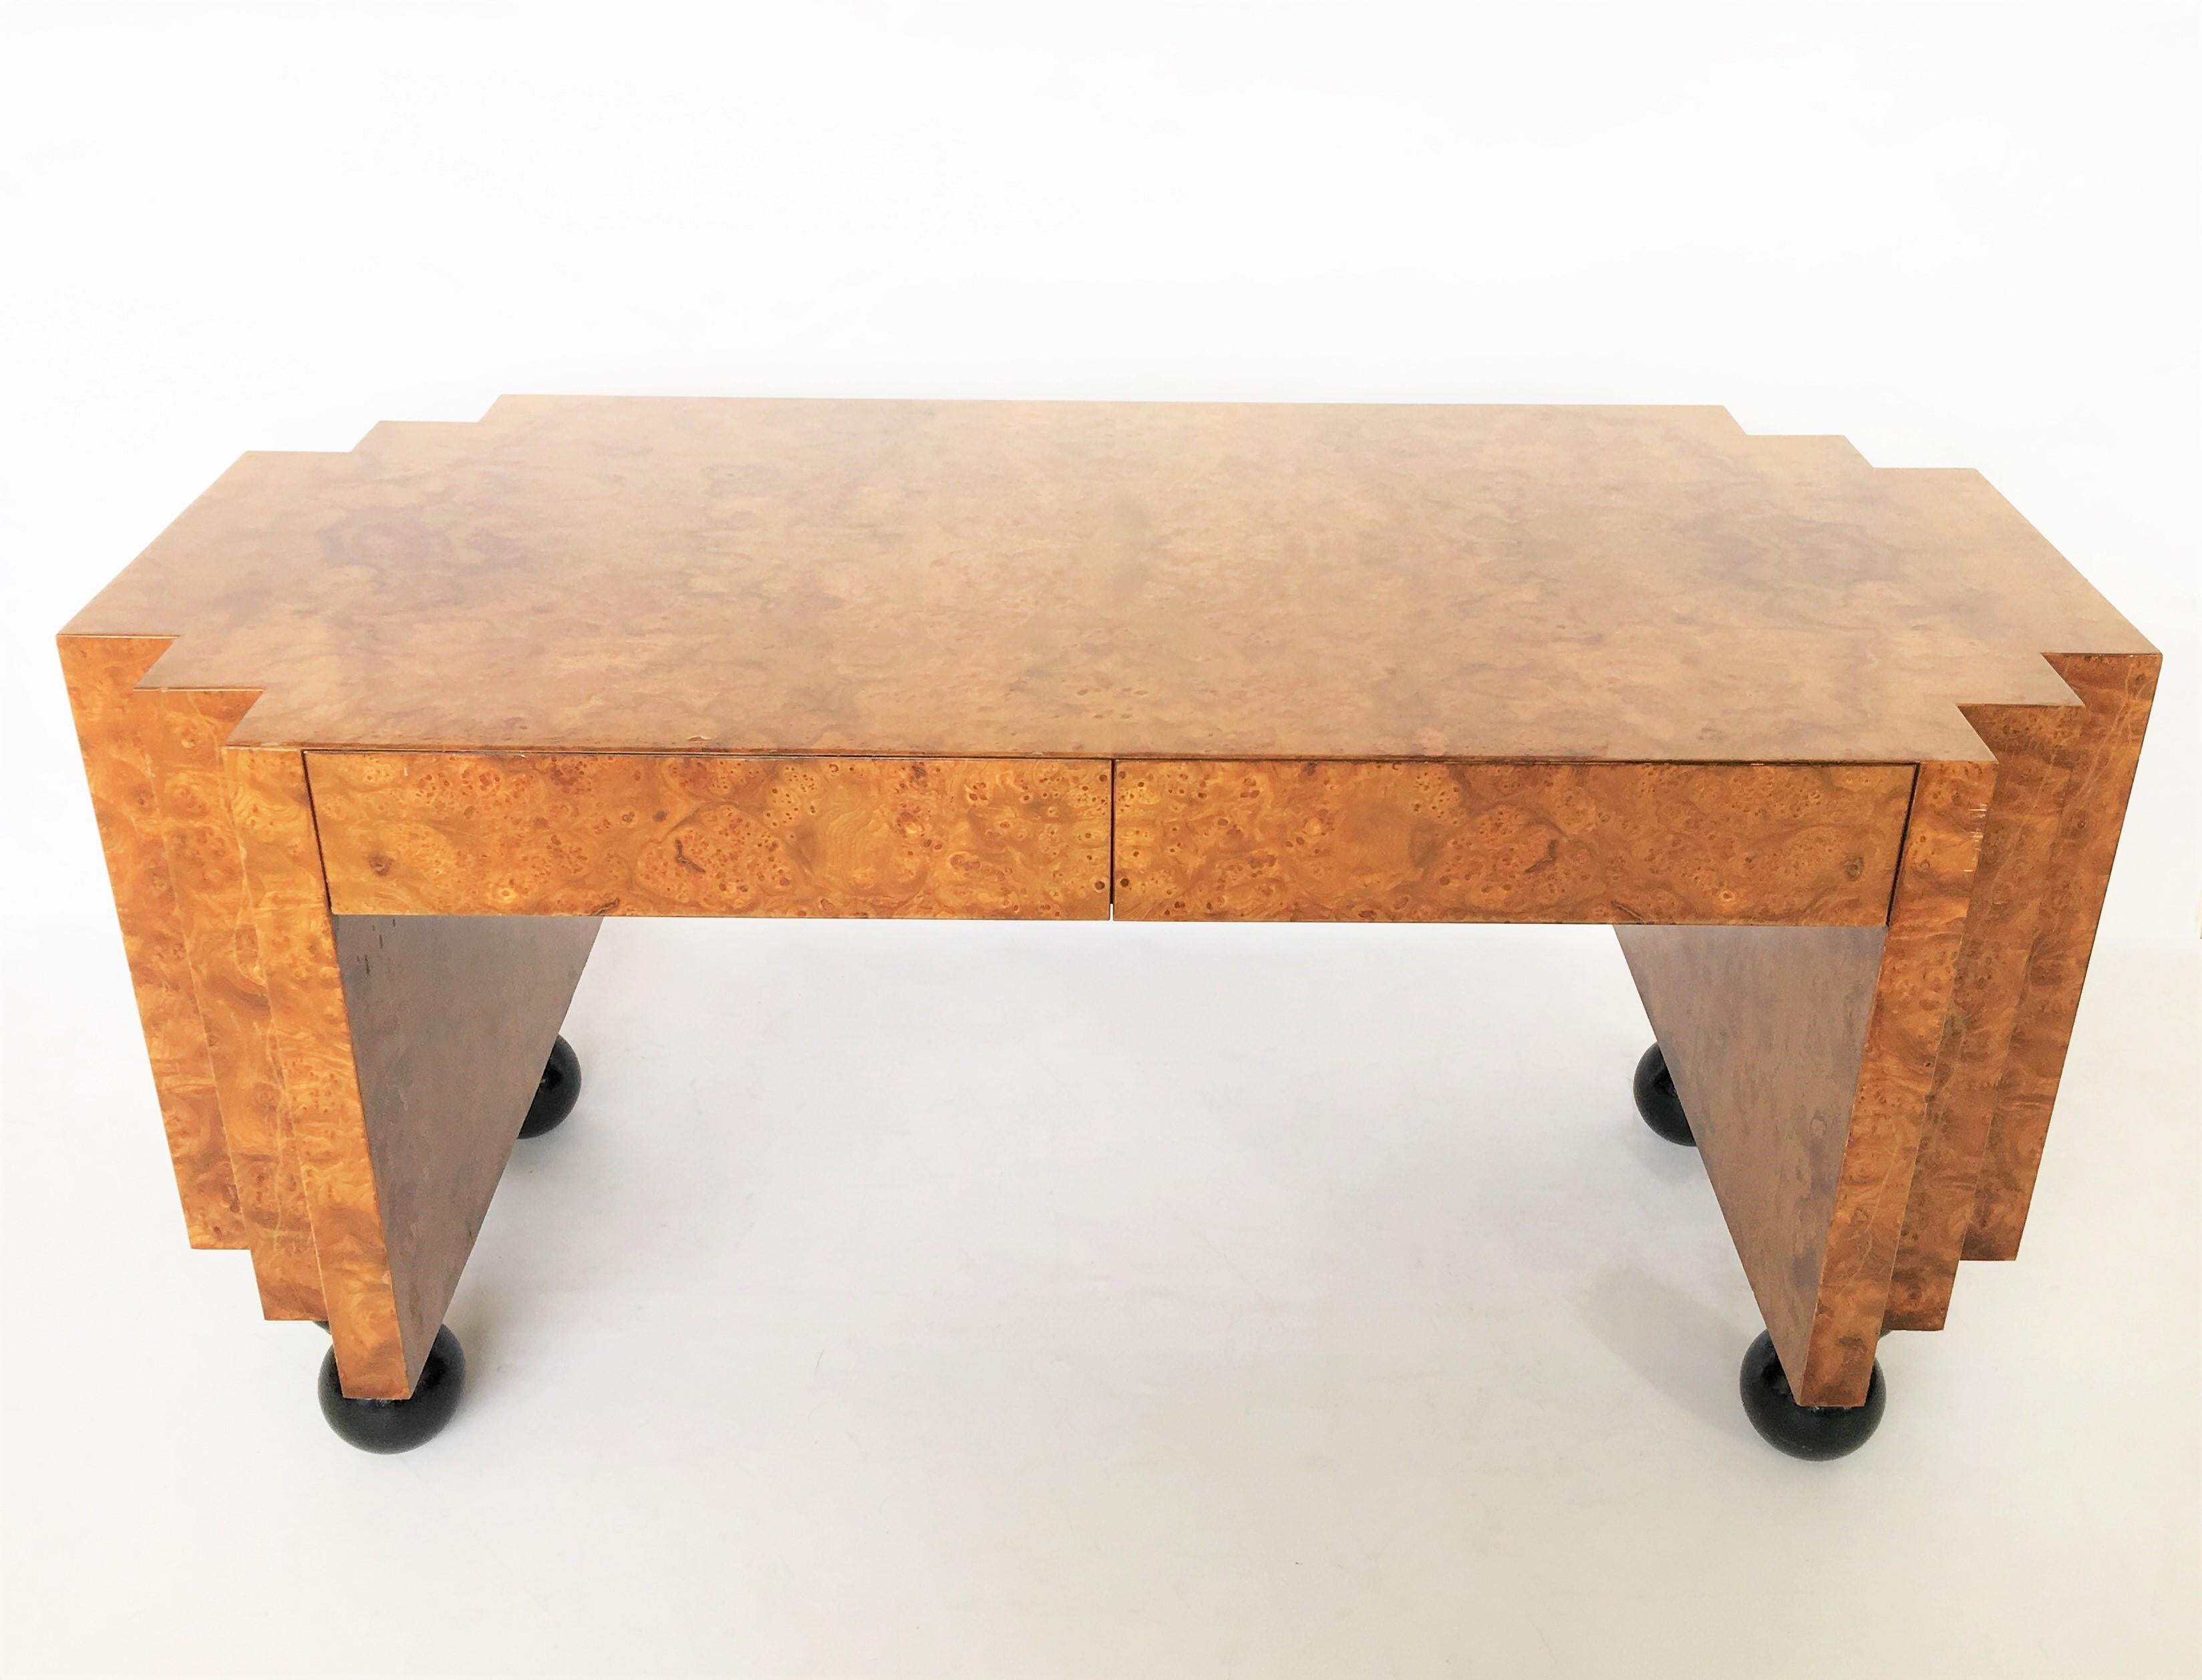 This gorgeous unusual burl wood desk in the style of Milo Baughman. With black lacquer legs Featuring two drawers.